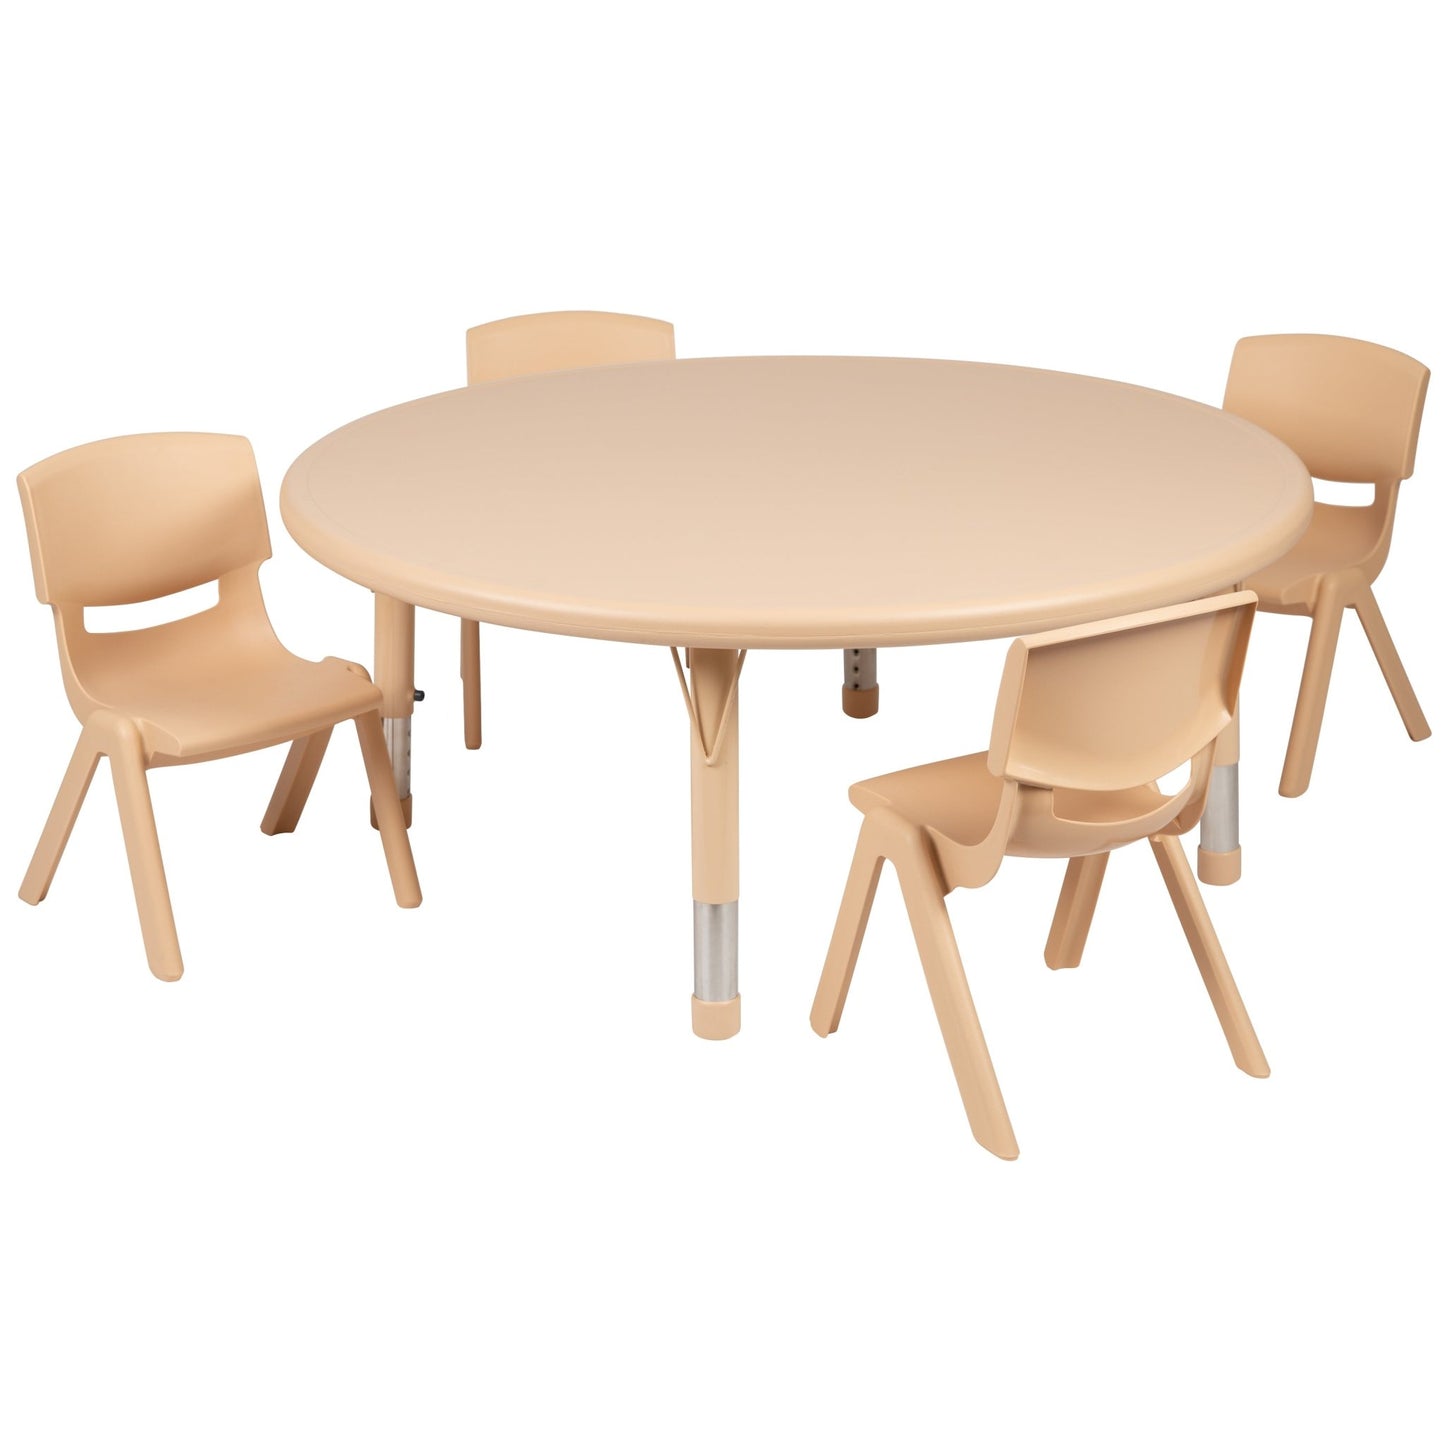 Emmy 45'' Round Plastic Height Adjustable Activity Table Set with 4 Chairs - SchoolOutlet